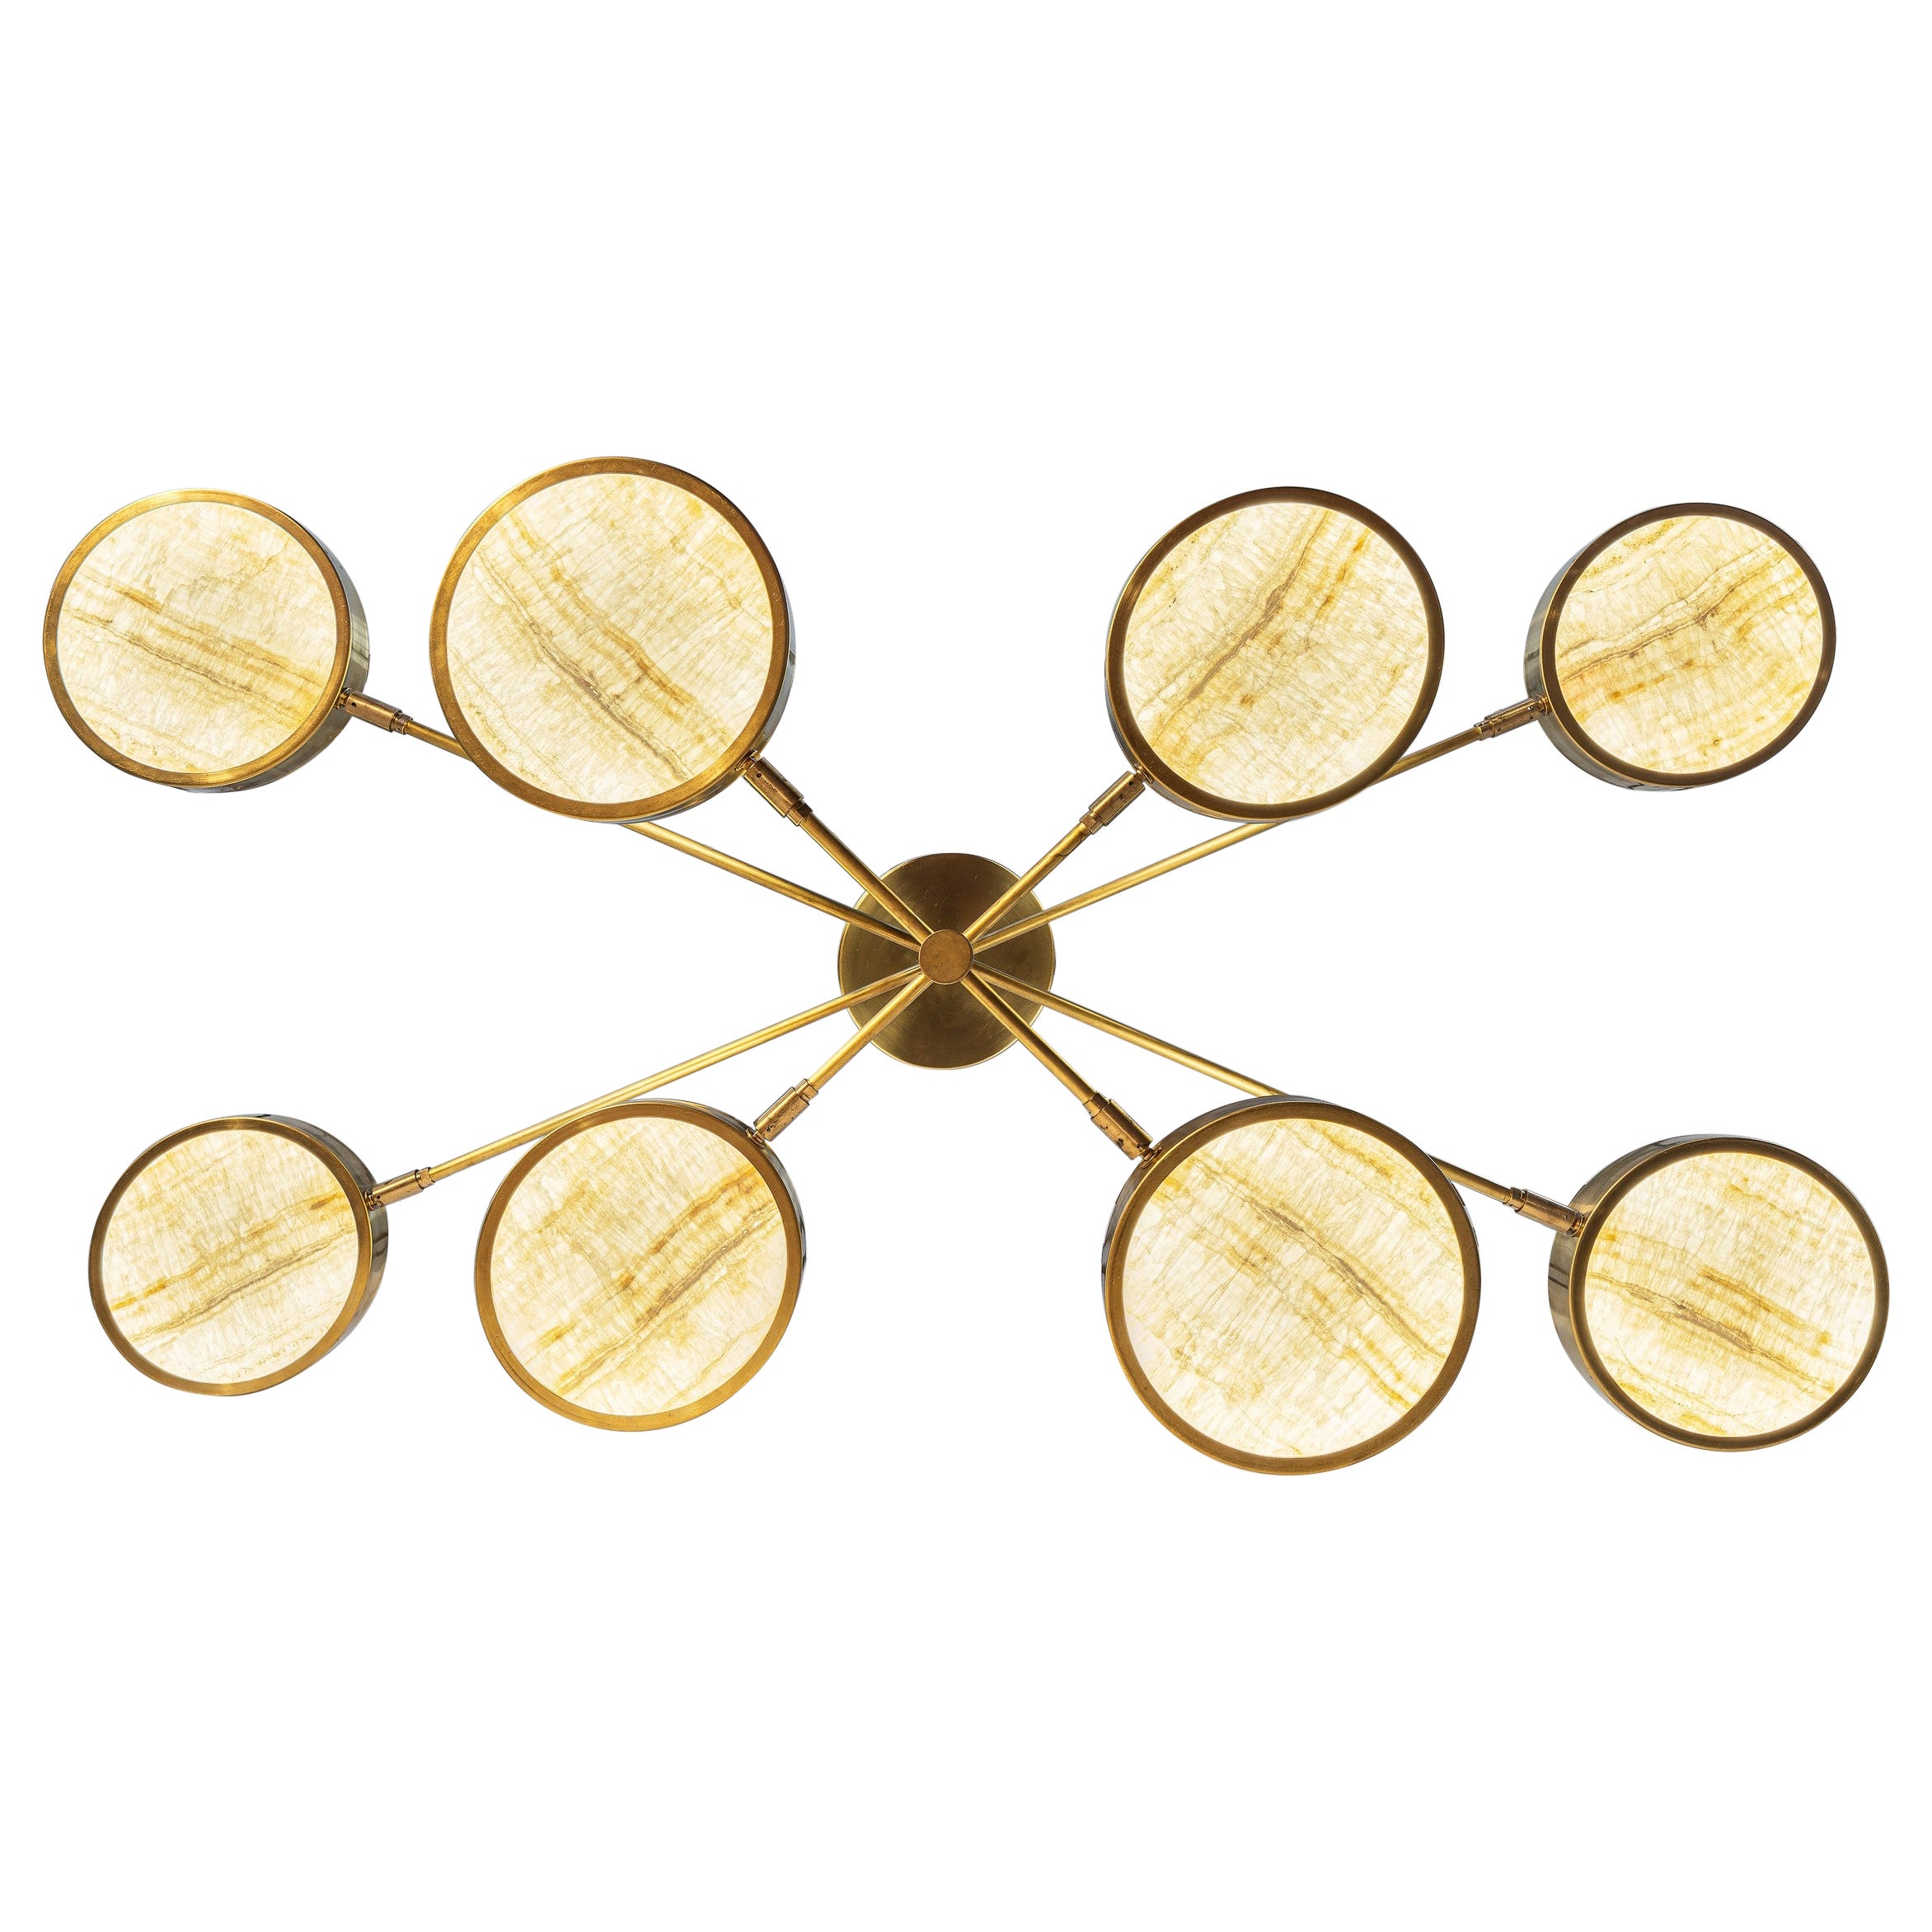 Luxury chandelier, made from thin pieces of translucent onyx. Ideal to be hung over a dining table, with versatile configurations. Featured on Netflix series Designing Miami, 1st episode! 

There is nothing else like this on the market.

Ivory onyx